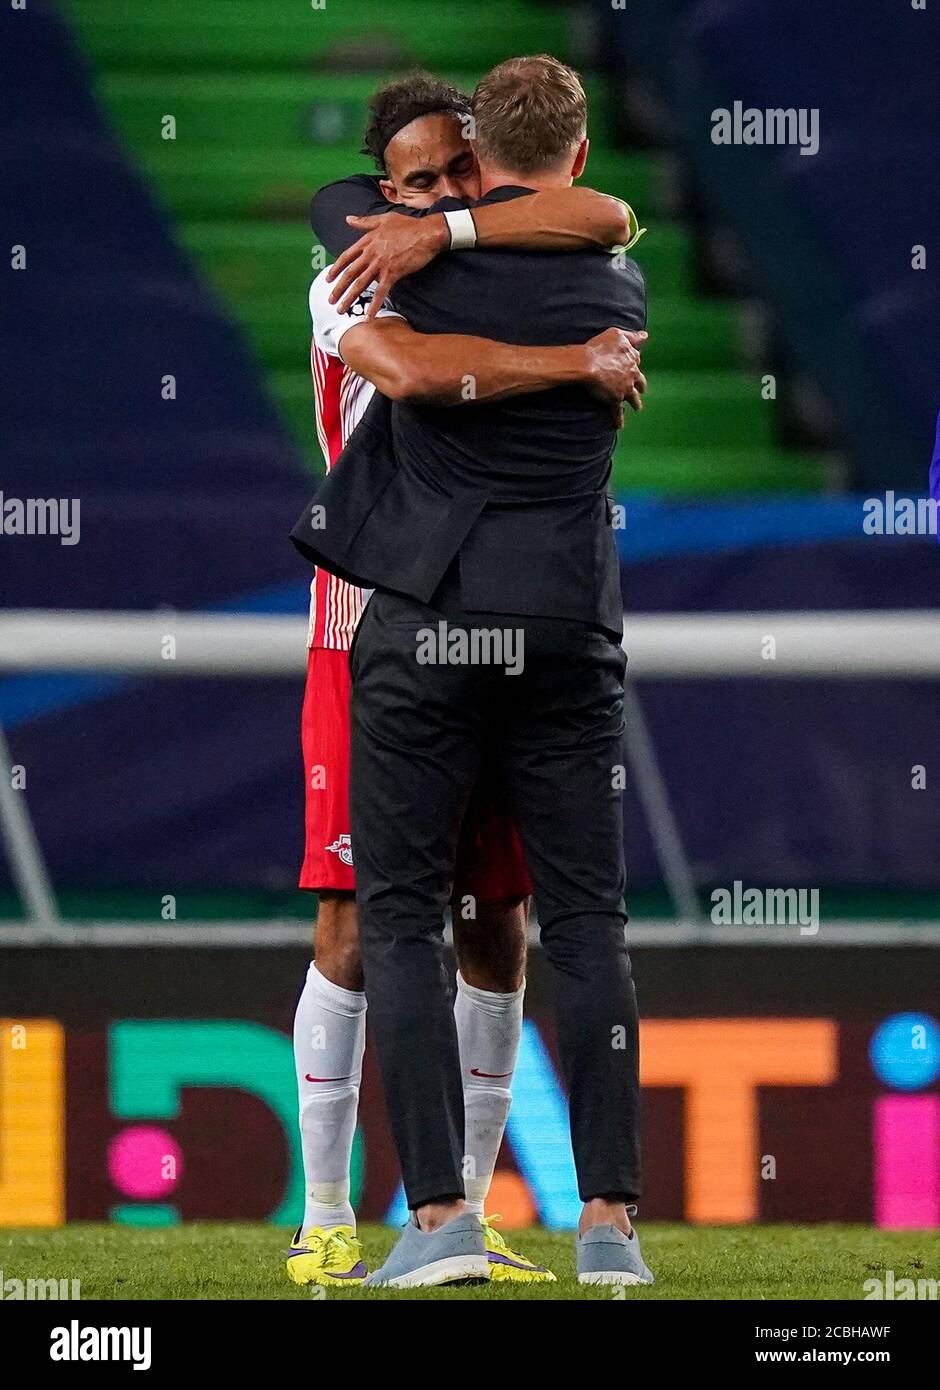 Lisbon, Portugal, 13th August 2020,  Schlussjubel: Trainer Julian Nagelsmann (RBL) und Yussuf Poulsen (RBL) in the quarterfinal UEFA Champions League match final tournament RB LEIPZIG - ATLETICO MADRID  in Season 2019/2020.  © Peter Schatz / Alamy Live News /Pool   - UEFA REGULATIONS PROHIBIT ANY USE OF PHOTOGRAPHS as IMAGE SEQUENCES and/or QUASI-VIDEO -  National and international News-Agencies OUT Editorial Use ONLY Stock Photo